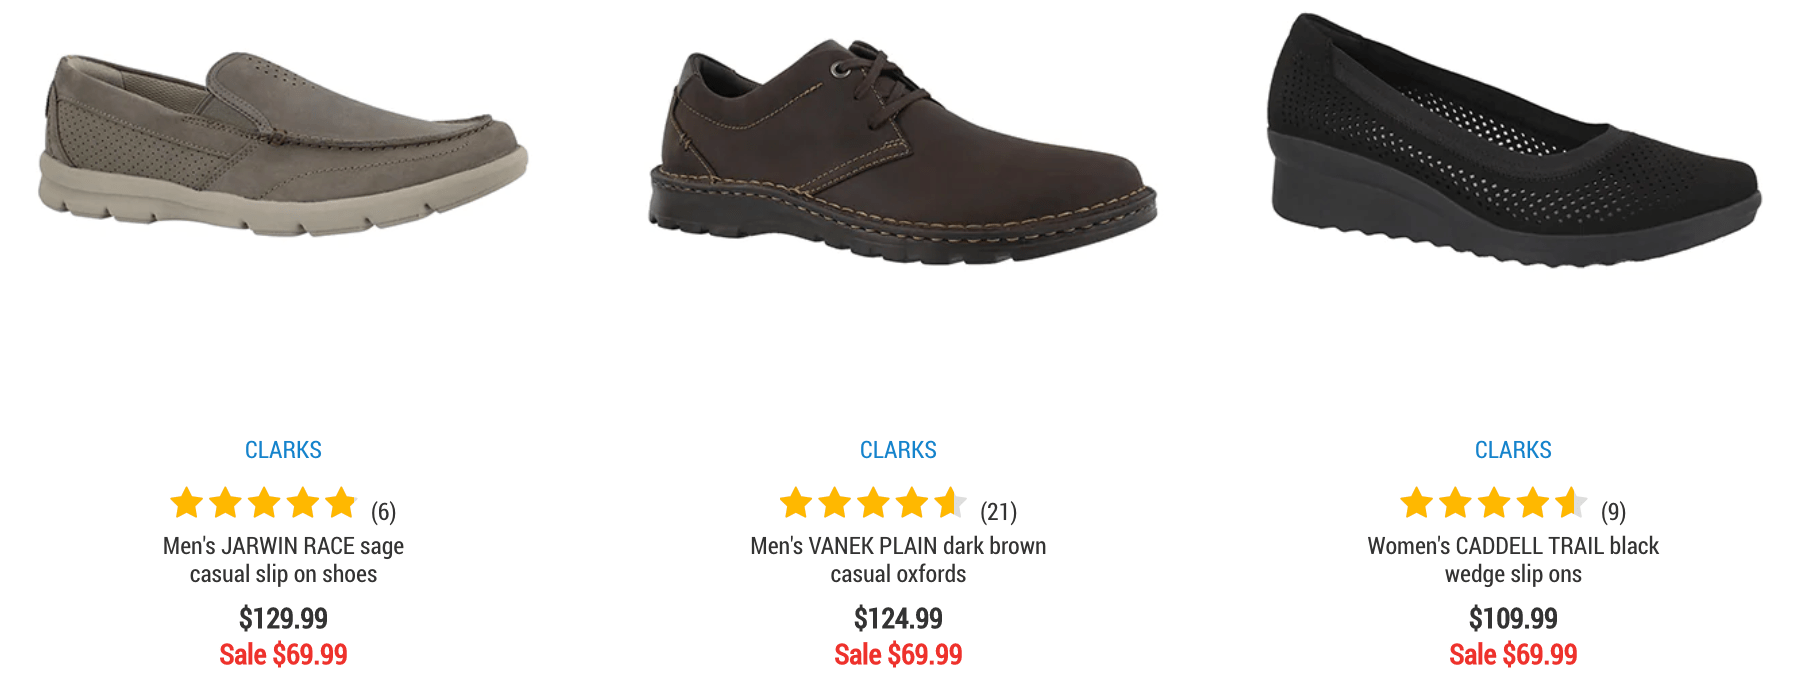 clarks shoes coupon 2018